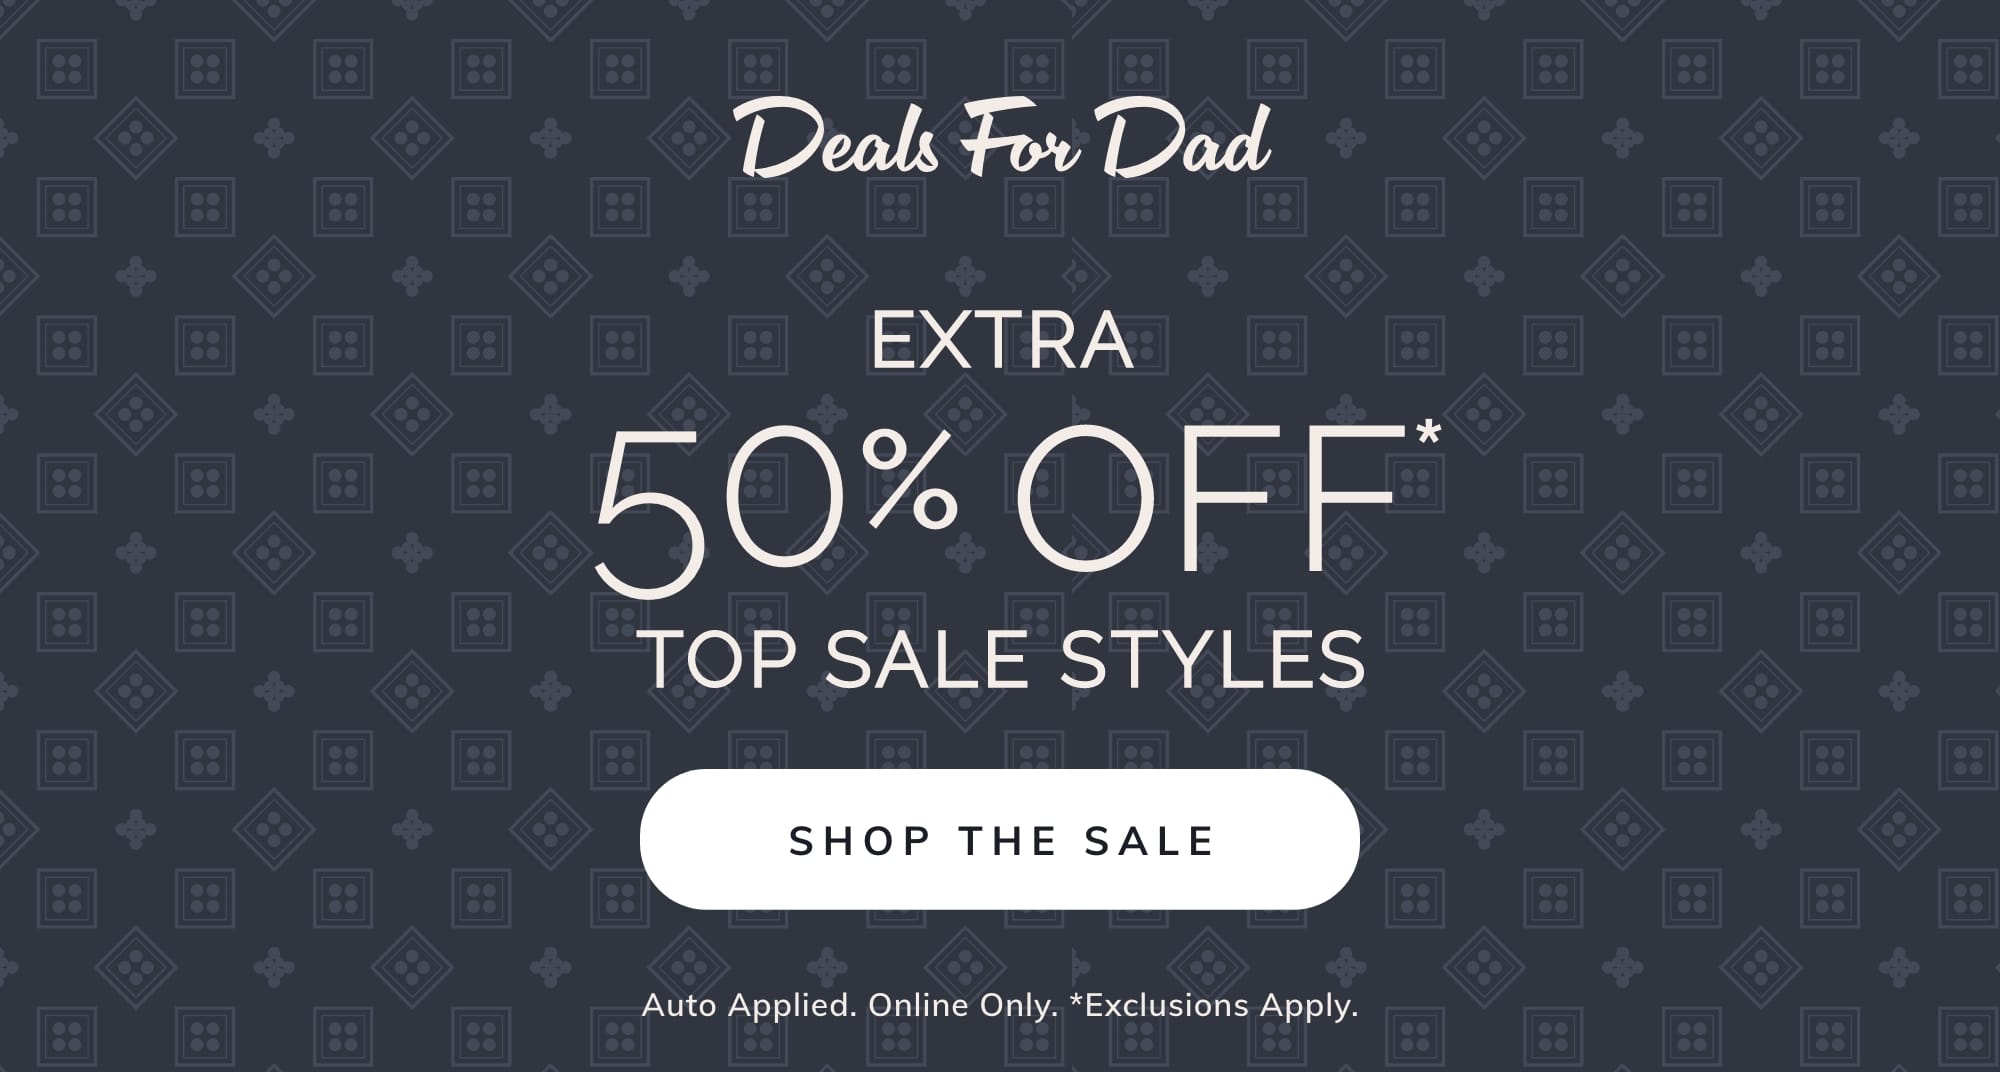 DEALS FOR DAD EXTRA 50% OFF* TOP SALE STYLES